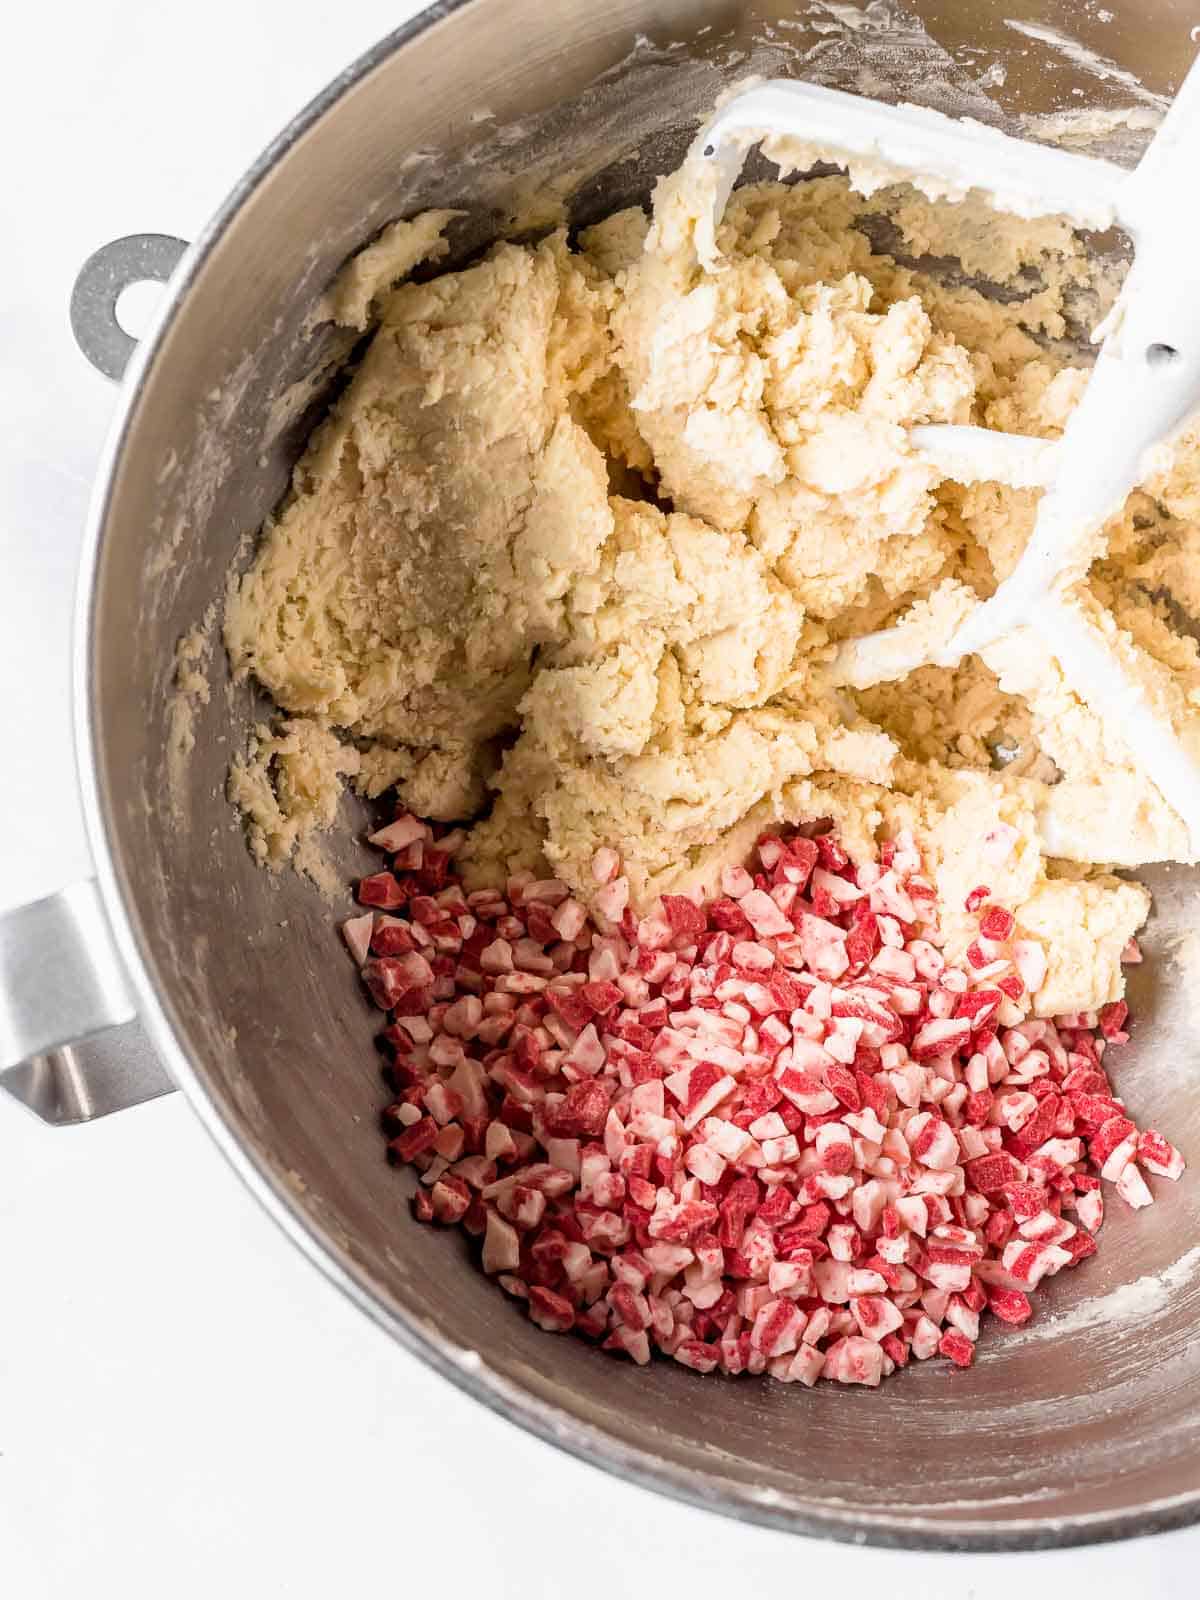 dough and peppermint chips in a mixing bowl